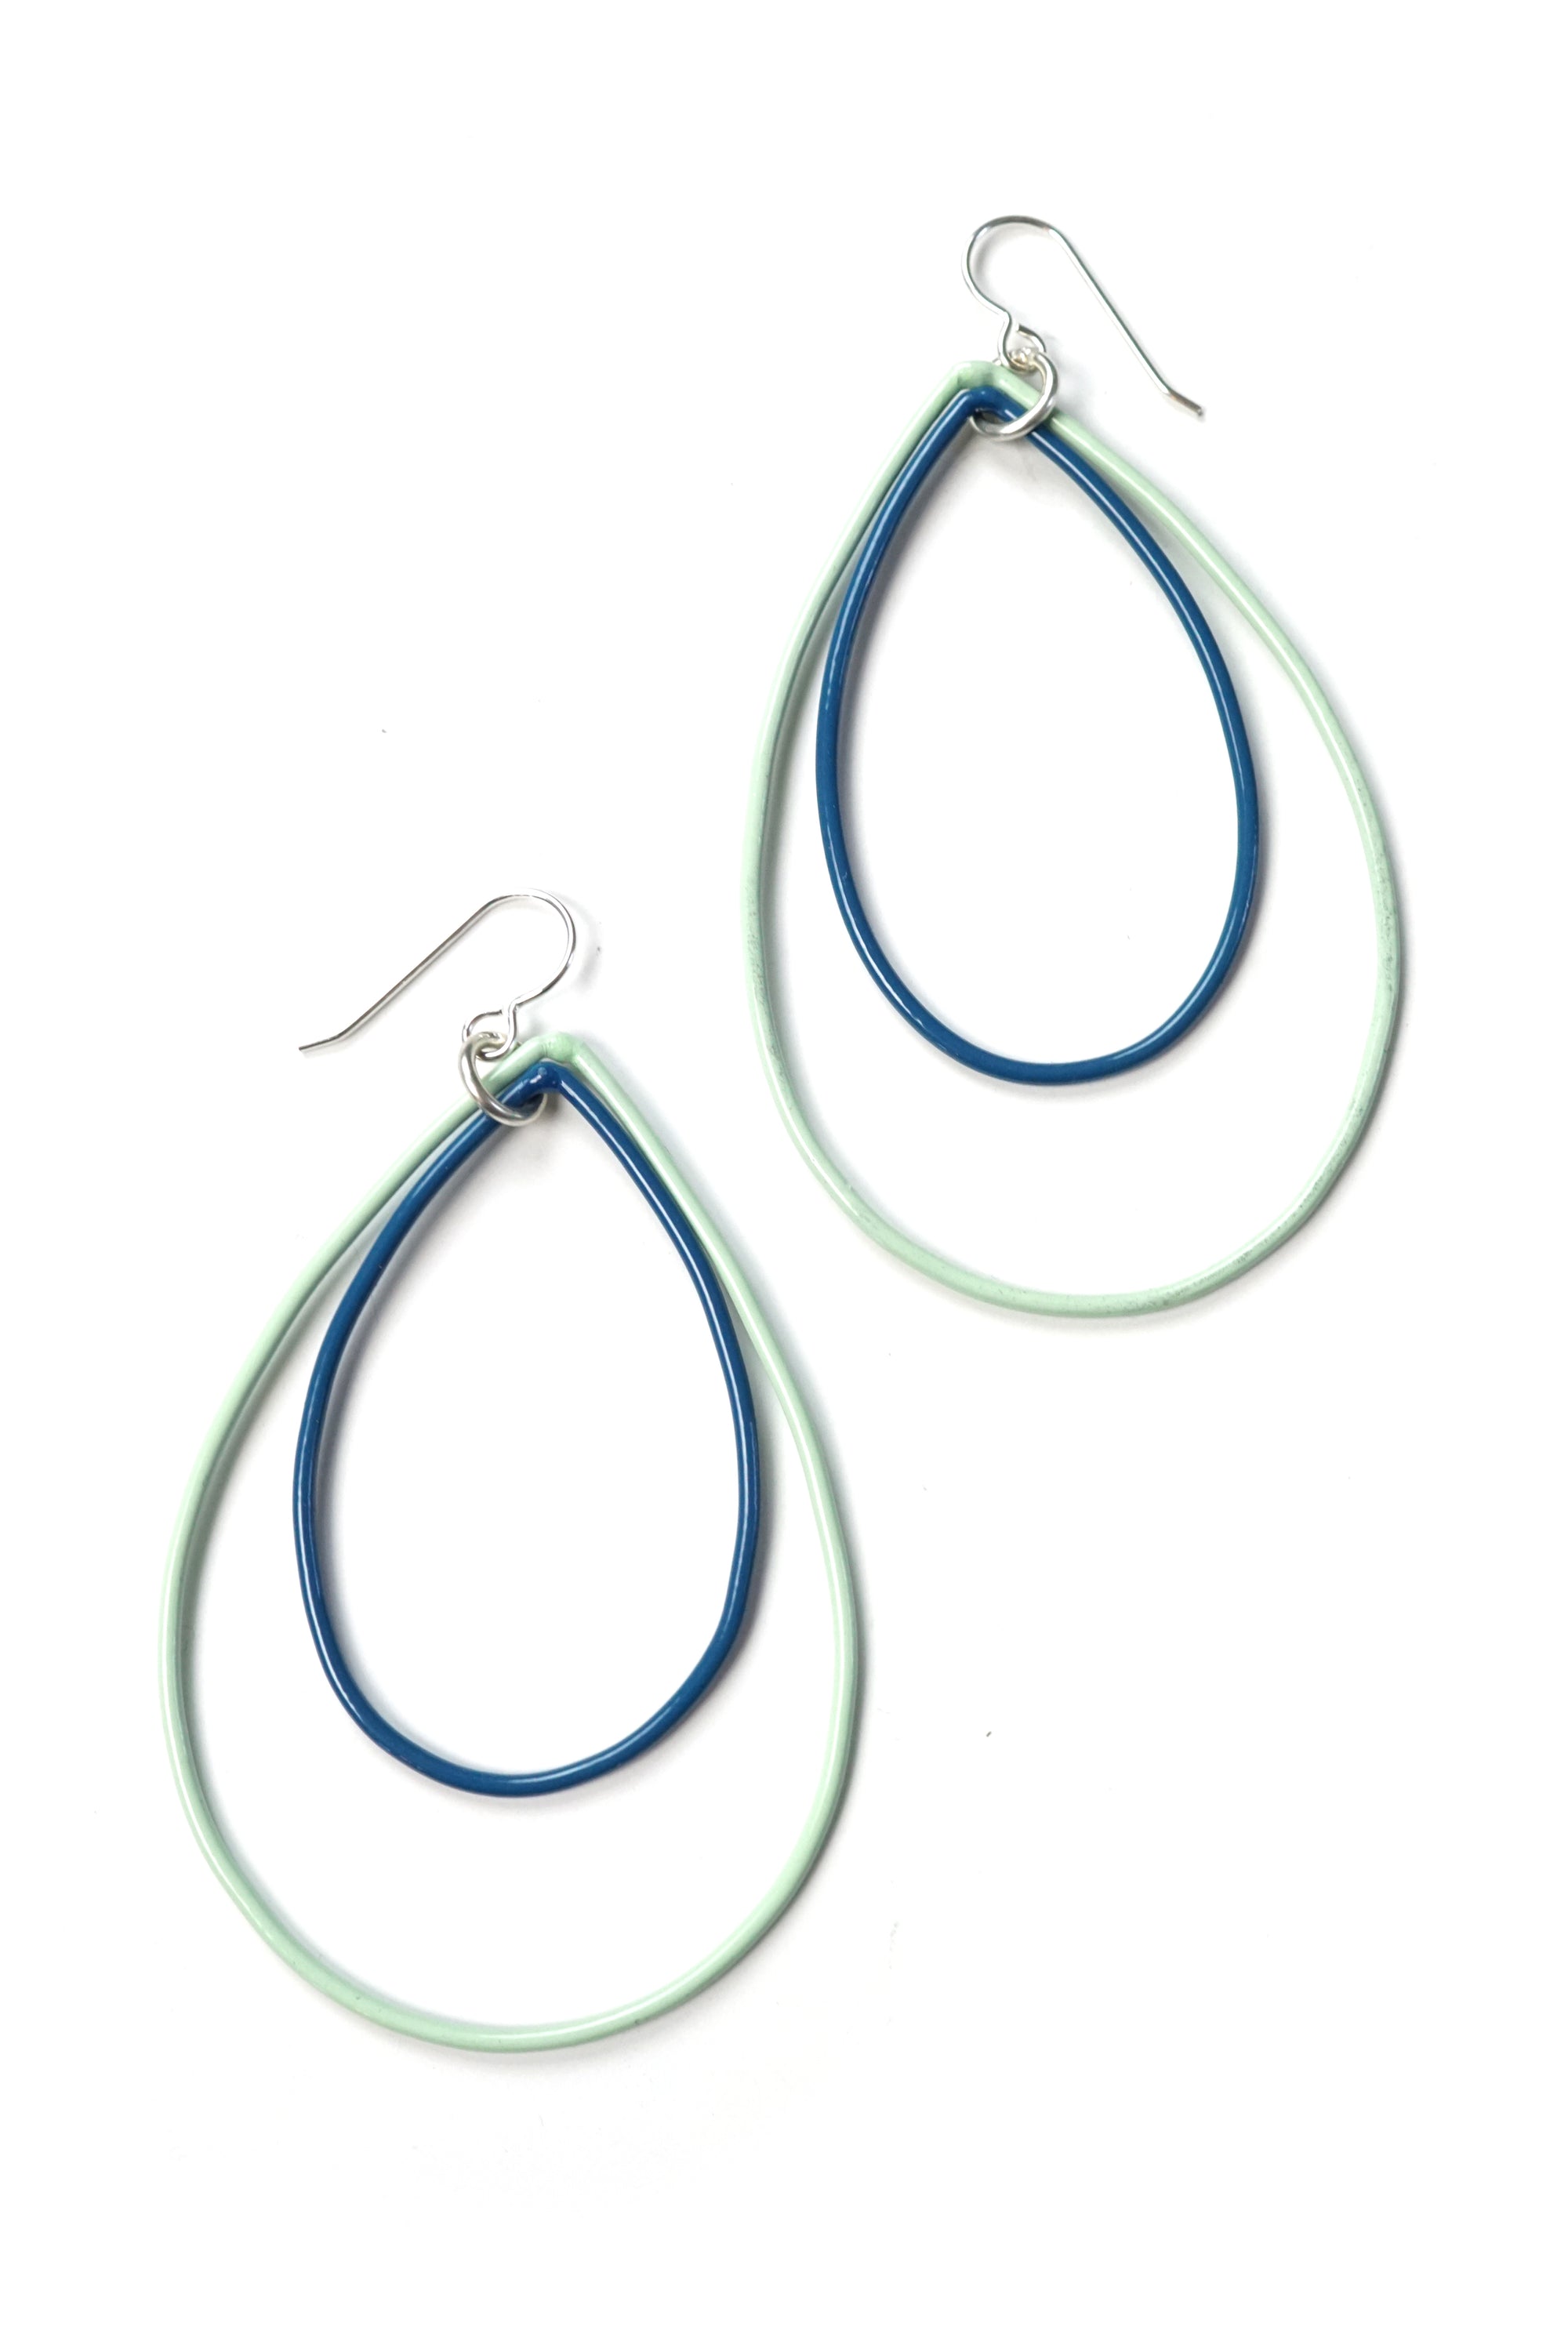 Large Eva earrings in Soft Mint and Azure Blue